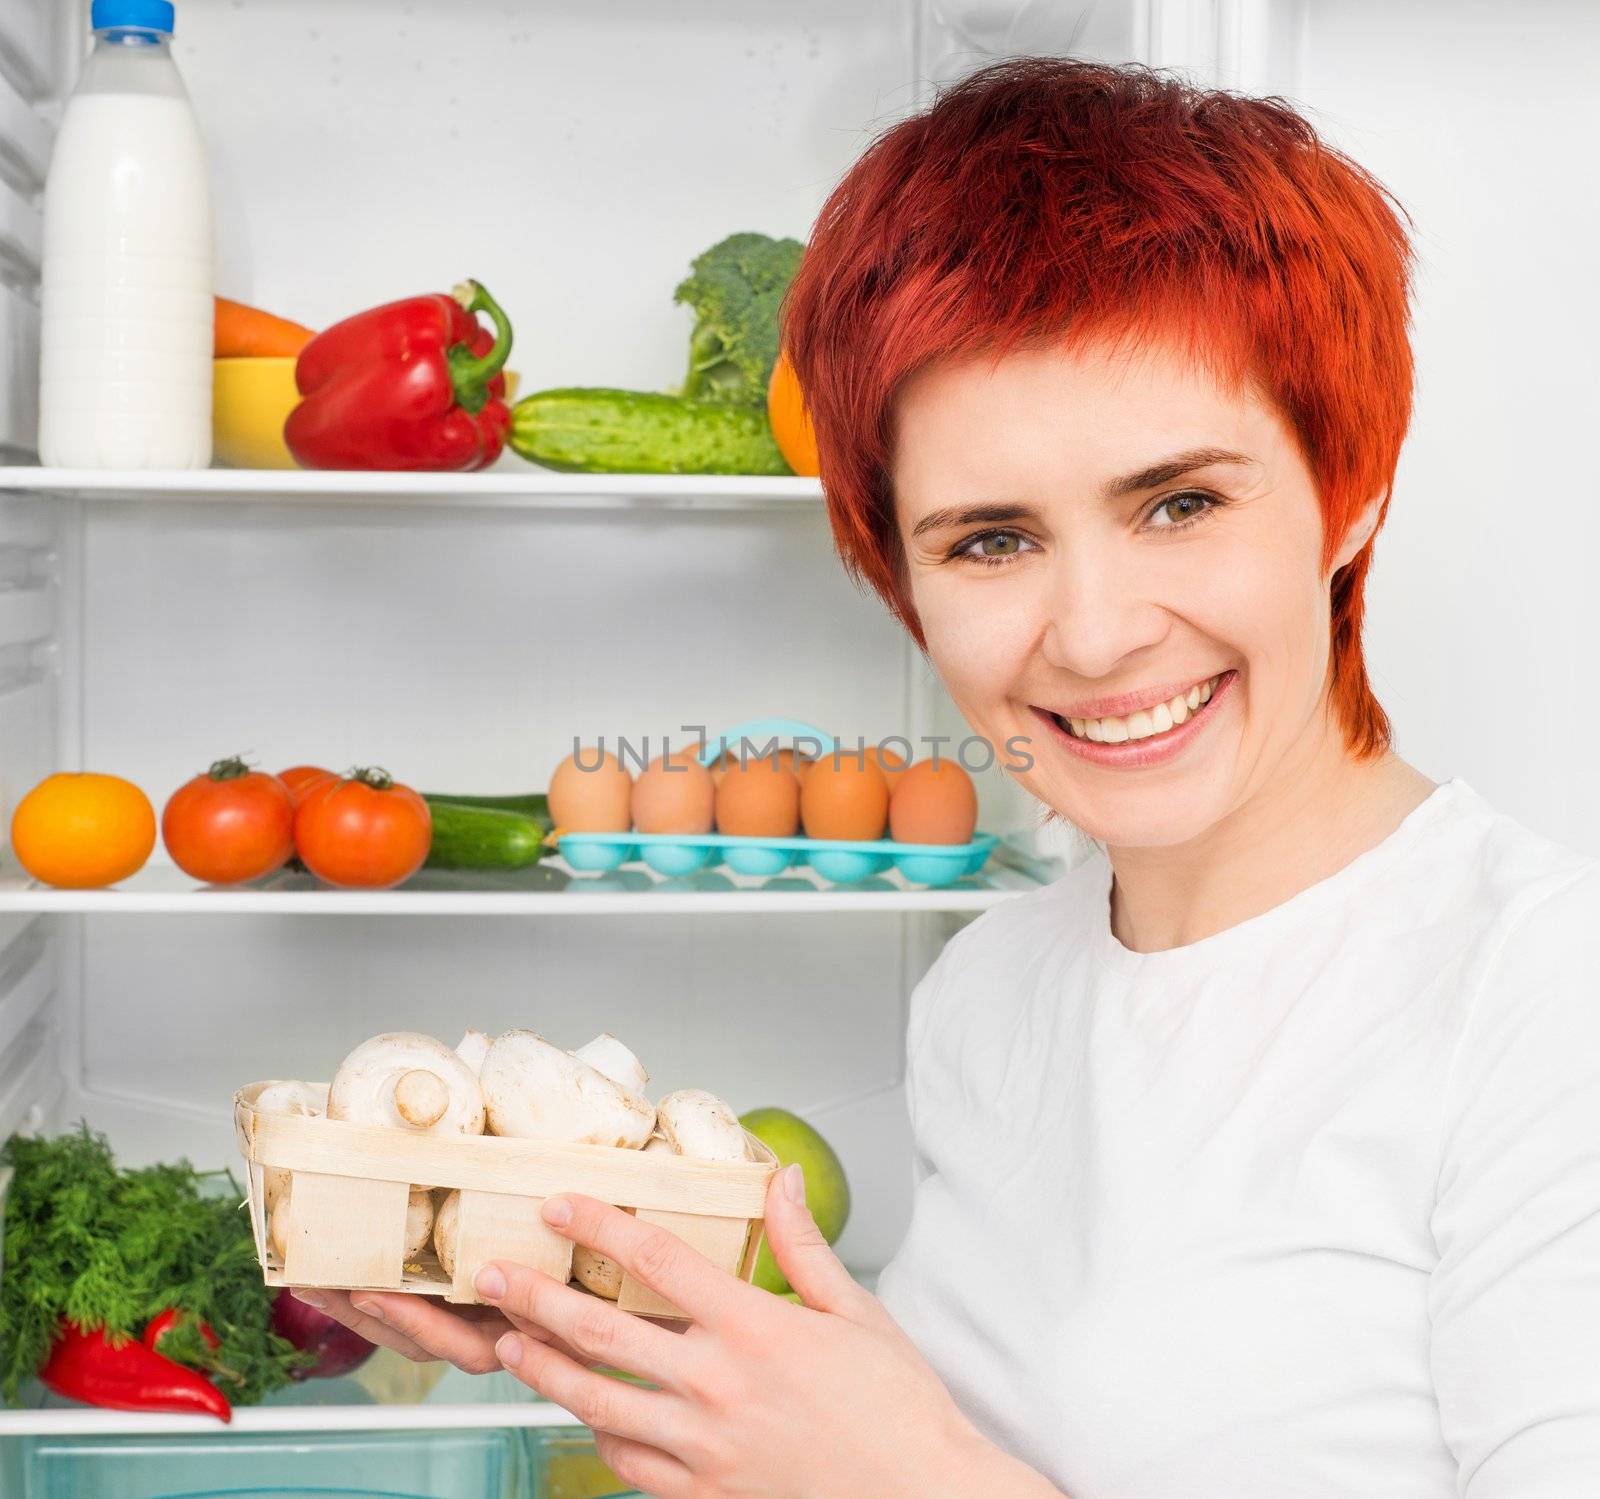 young smiling woman with mushroom against the refrigerator with food